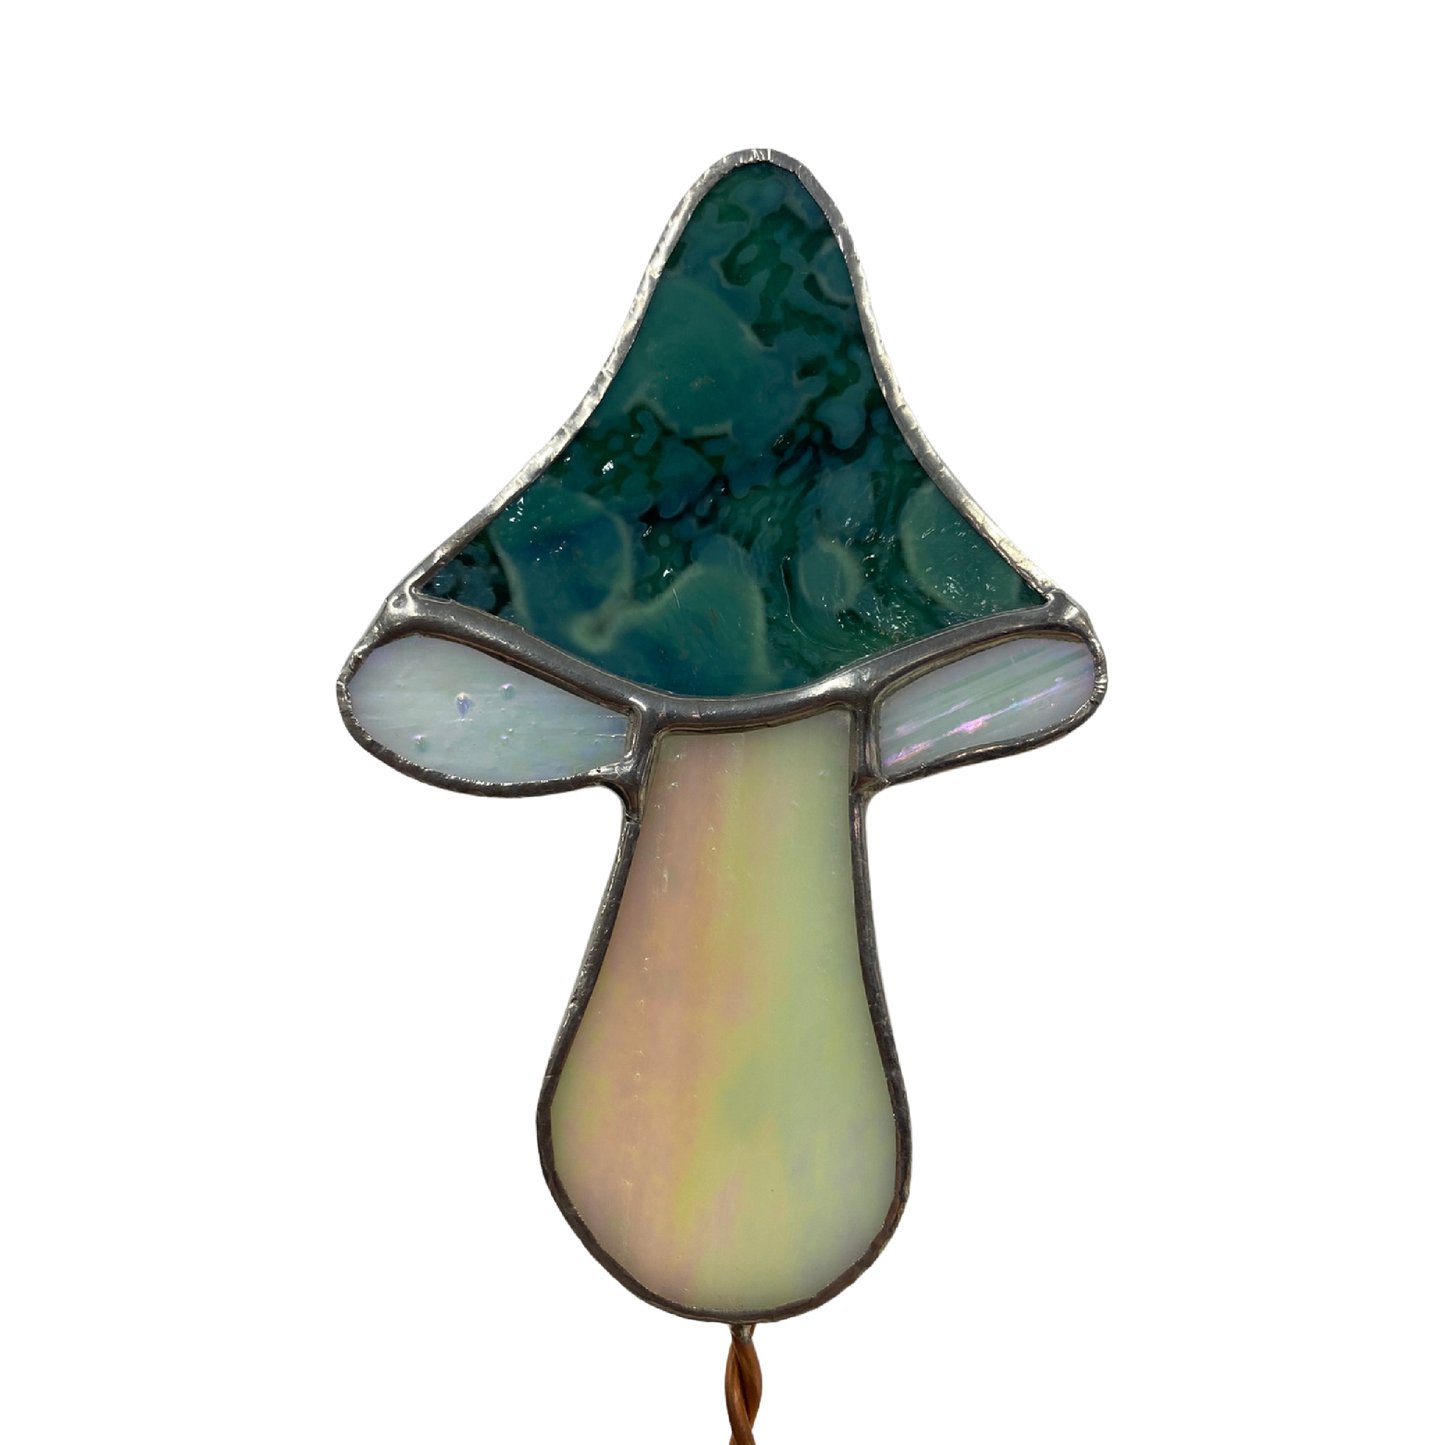 Adorable stained glass mushroom. Locally made and a great gift for all plant lovers!